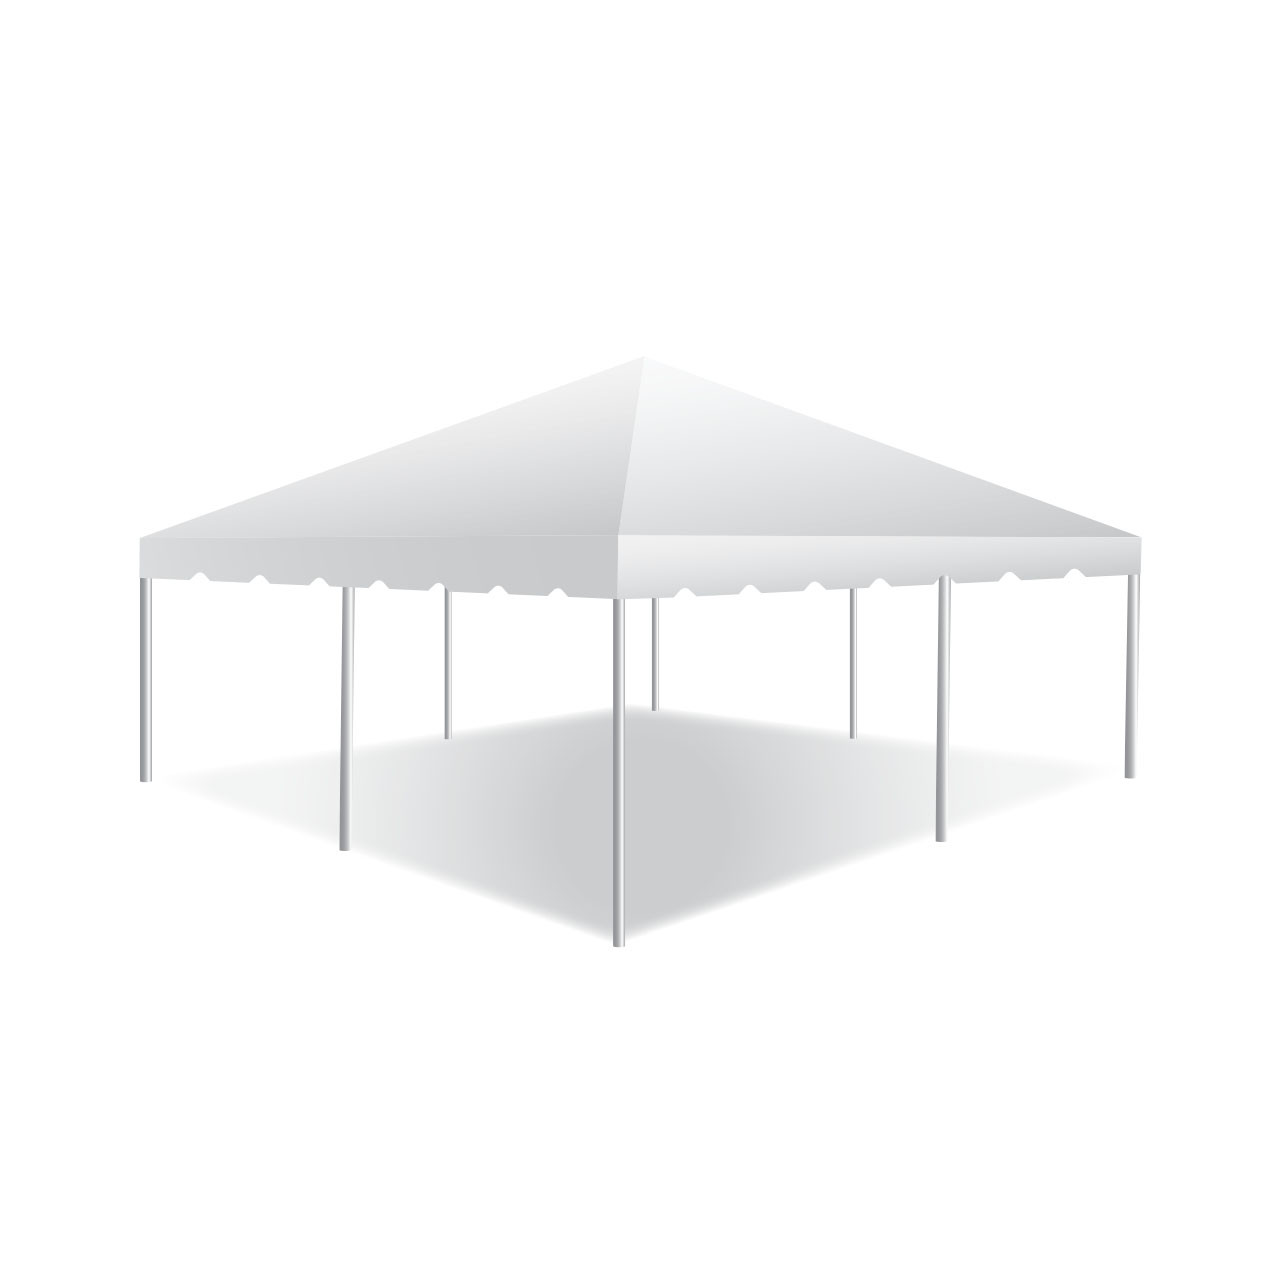 Classic Frame Tents